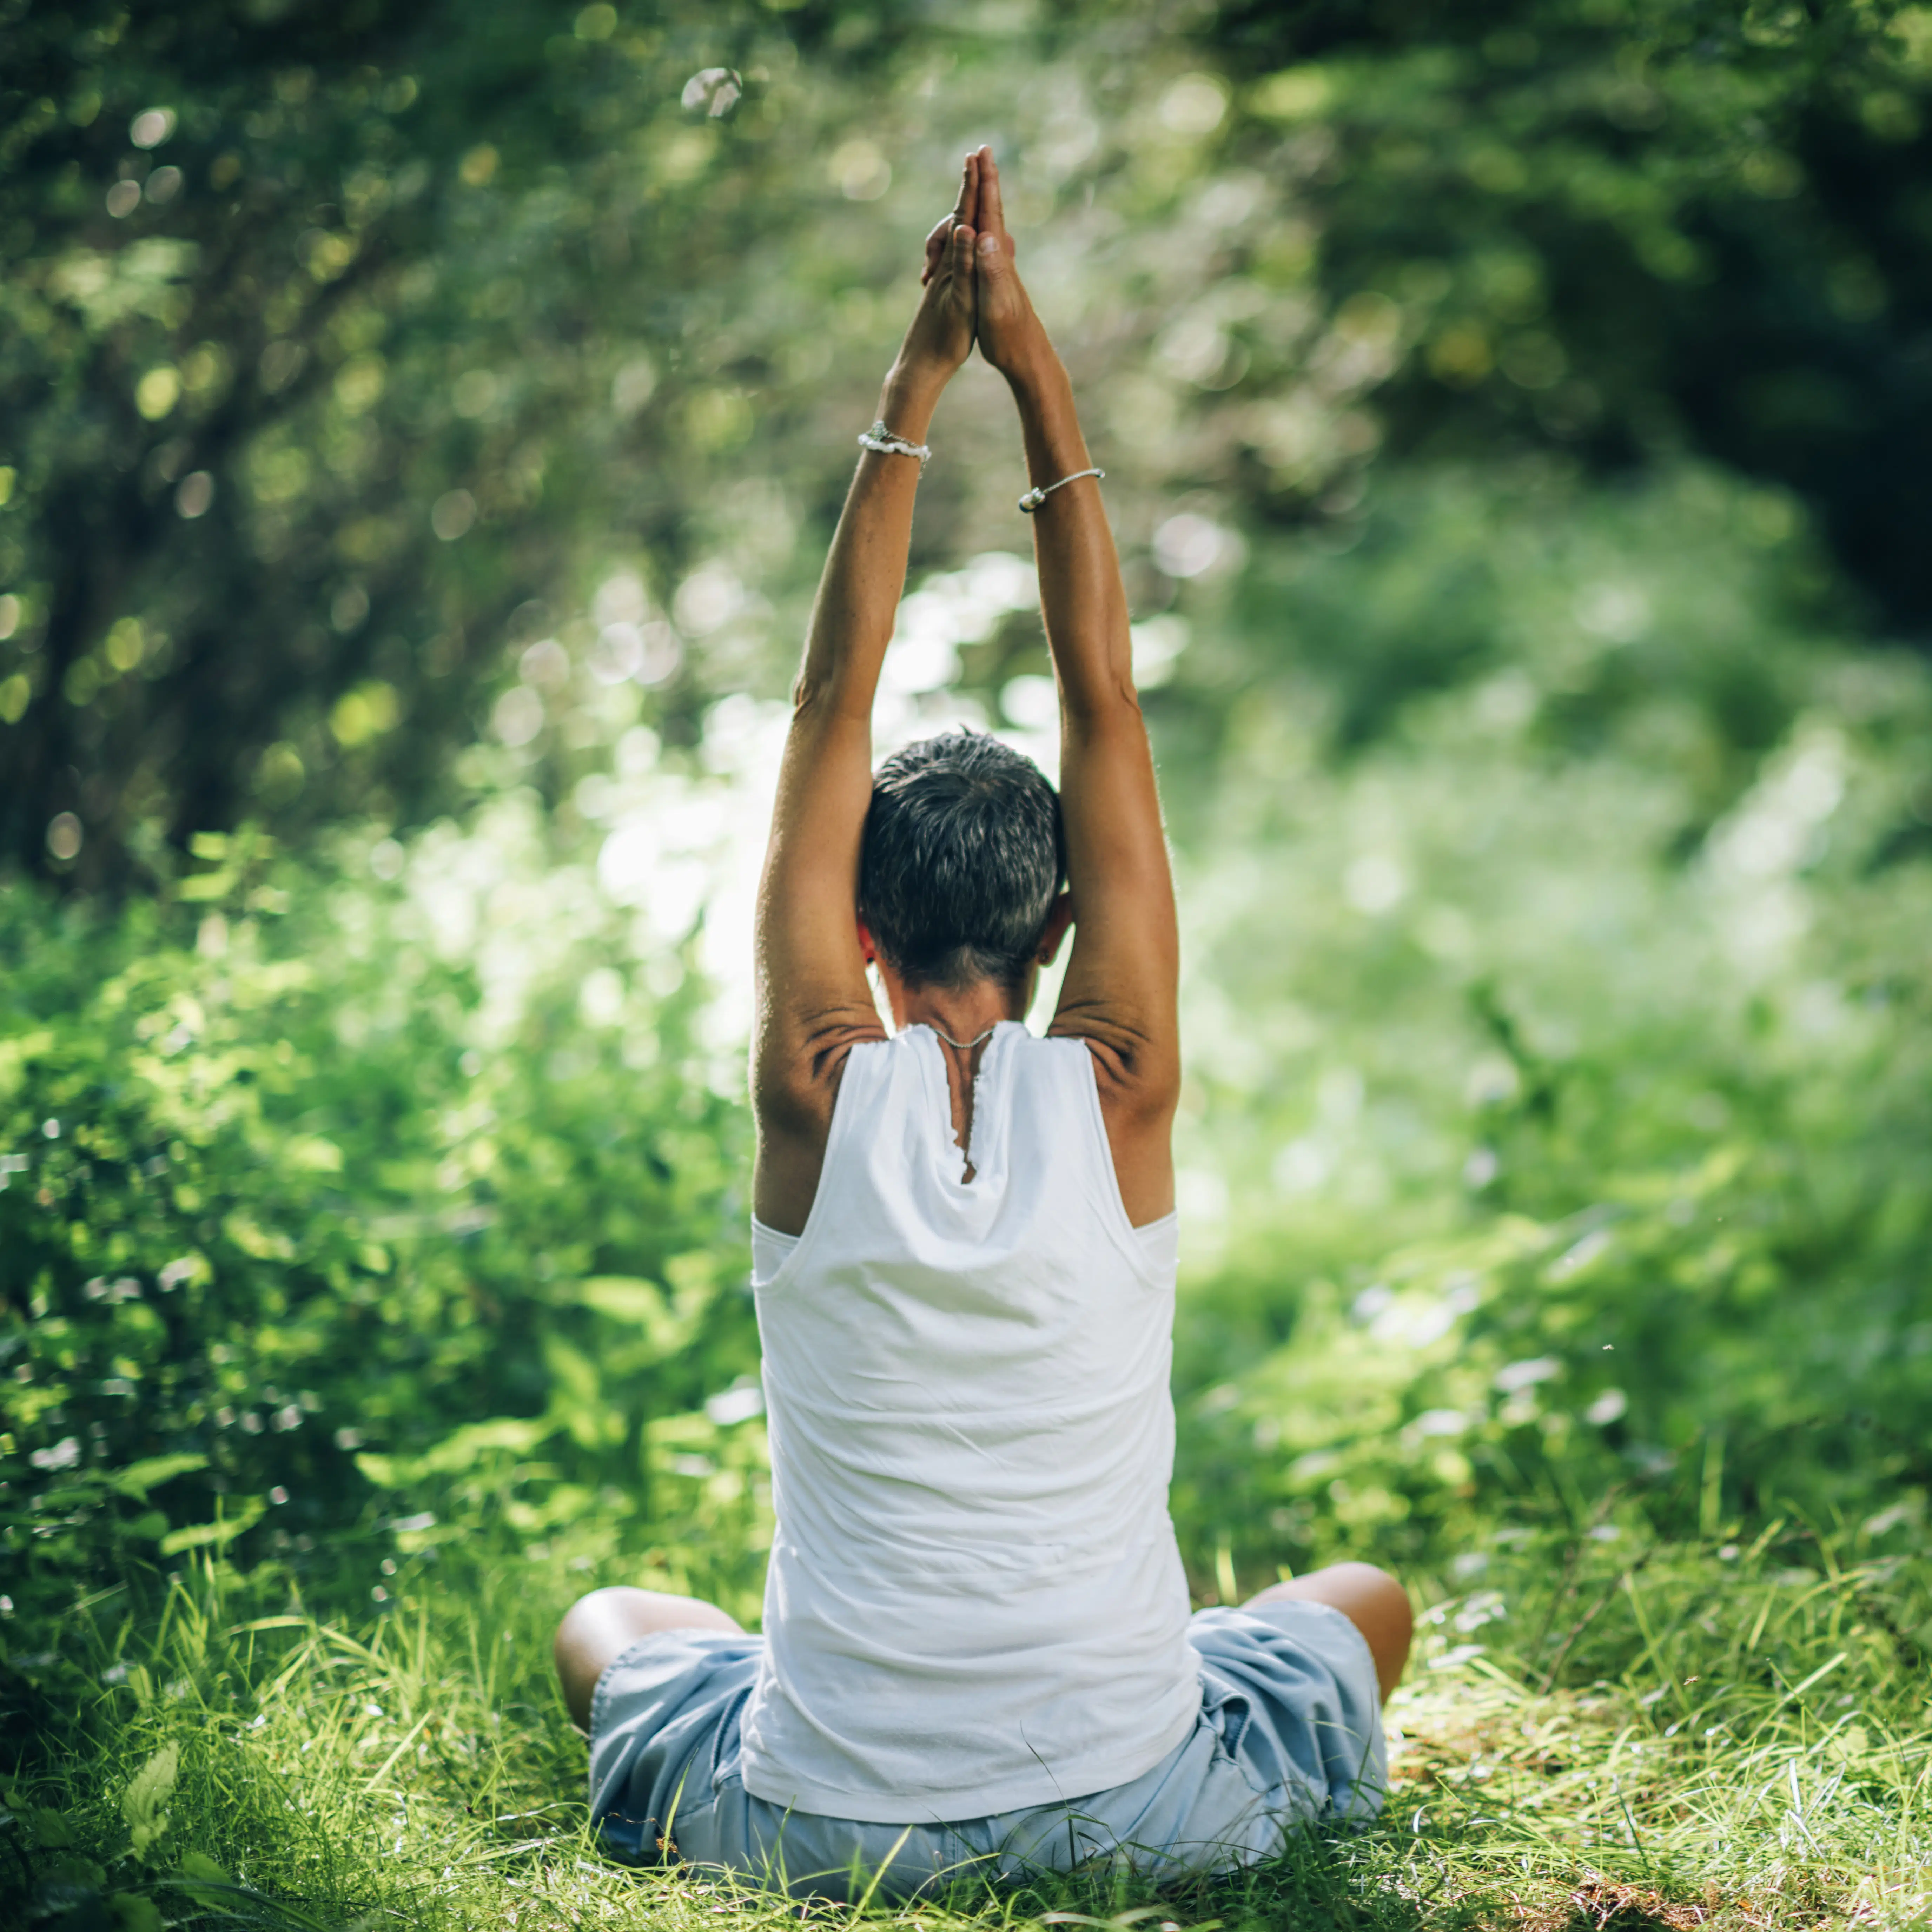  Om Reset provides accessible yoga and meditation classes to help people lead healthier lives.